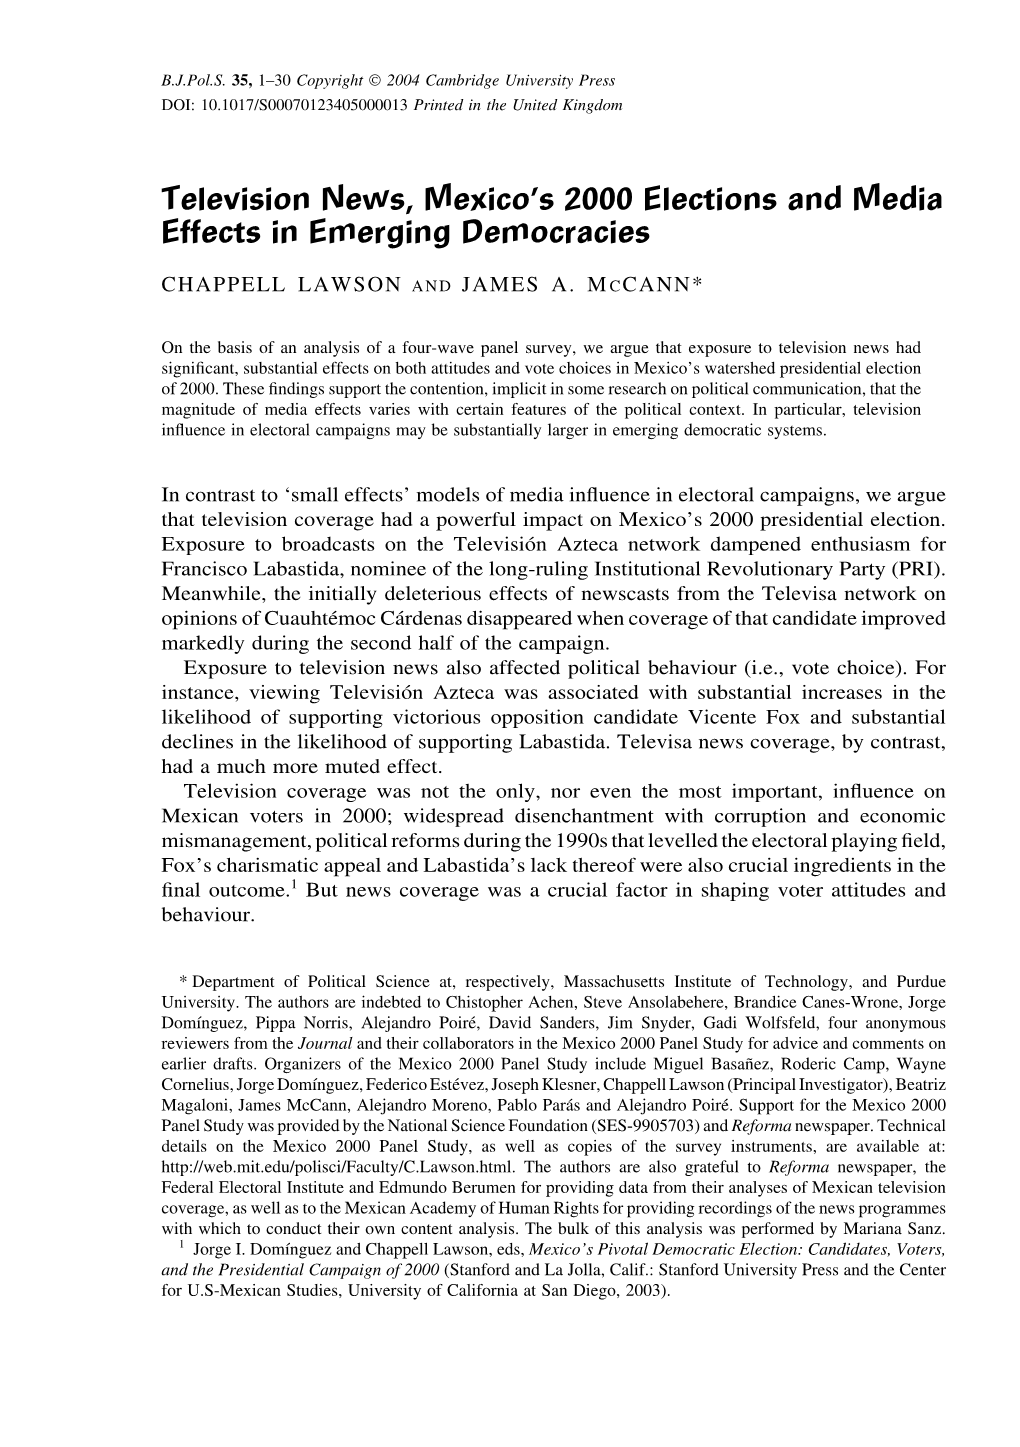 Television News, Mexico's 2000 Elections and Media Effects In